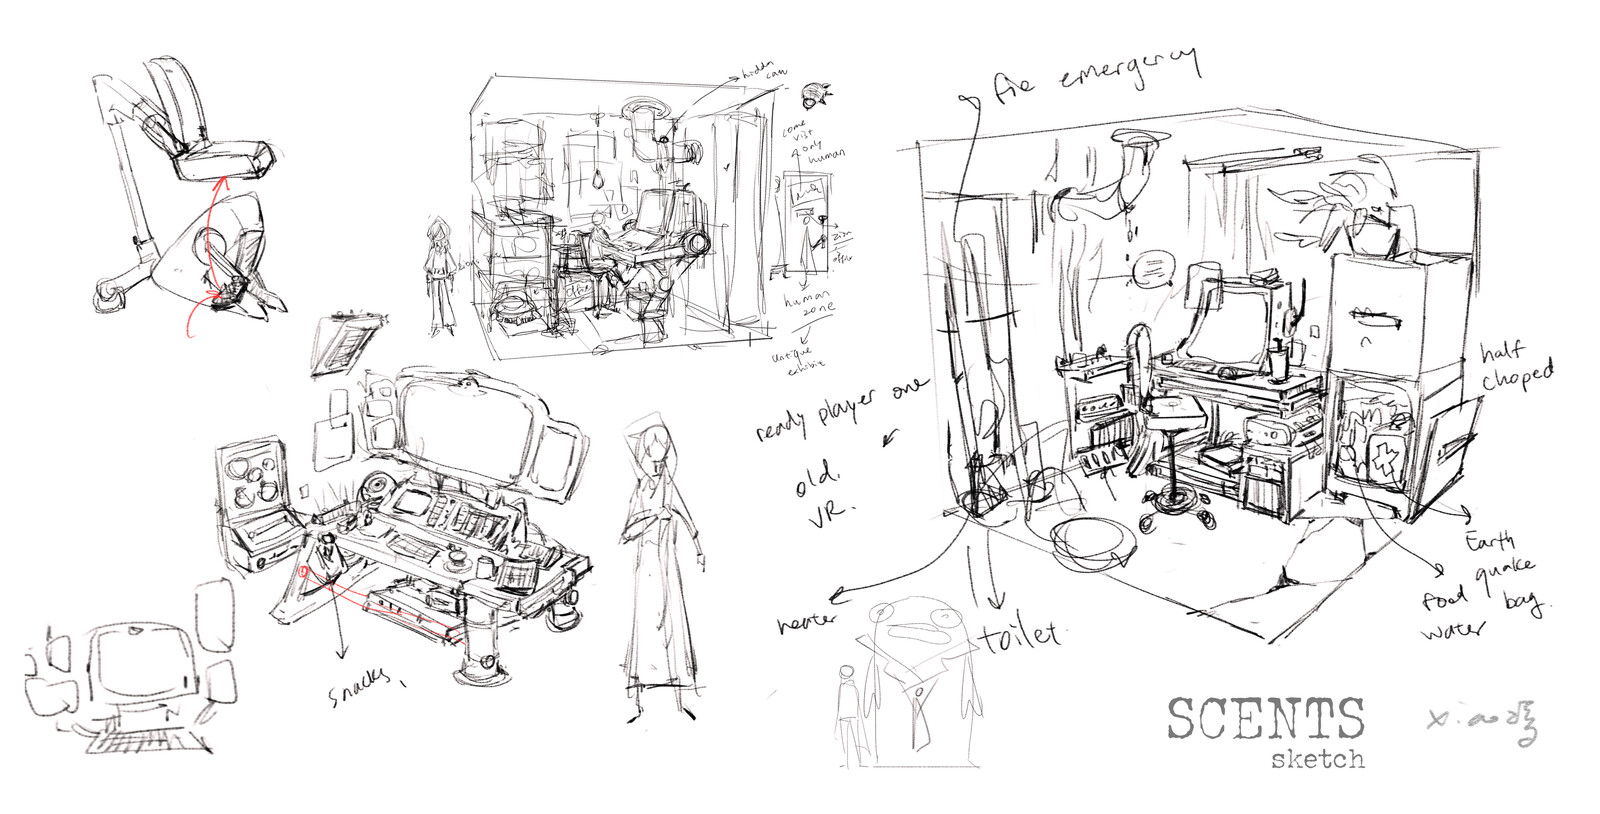 Shen's office sketches